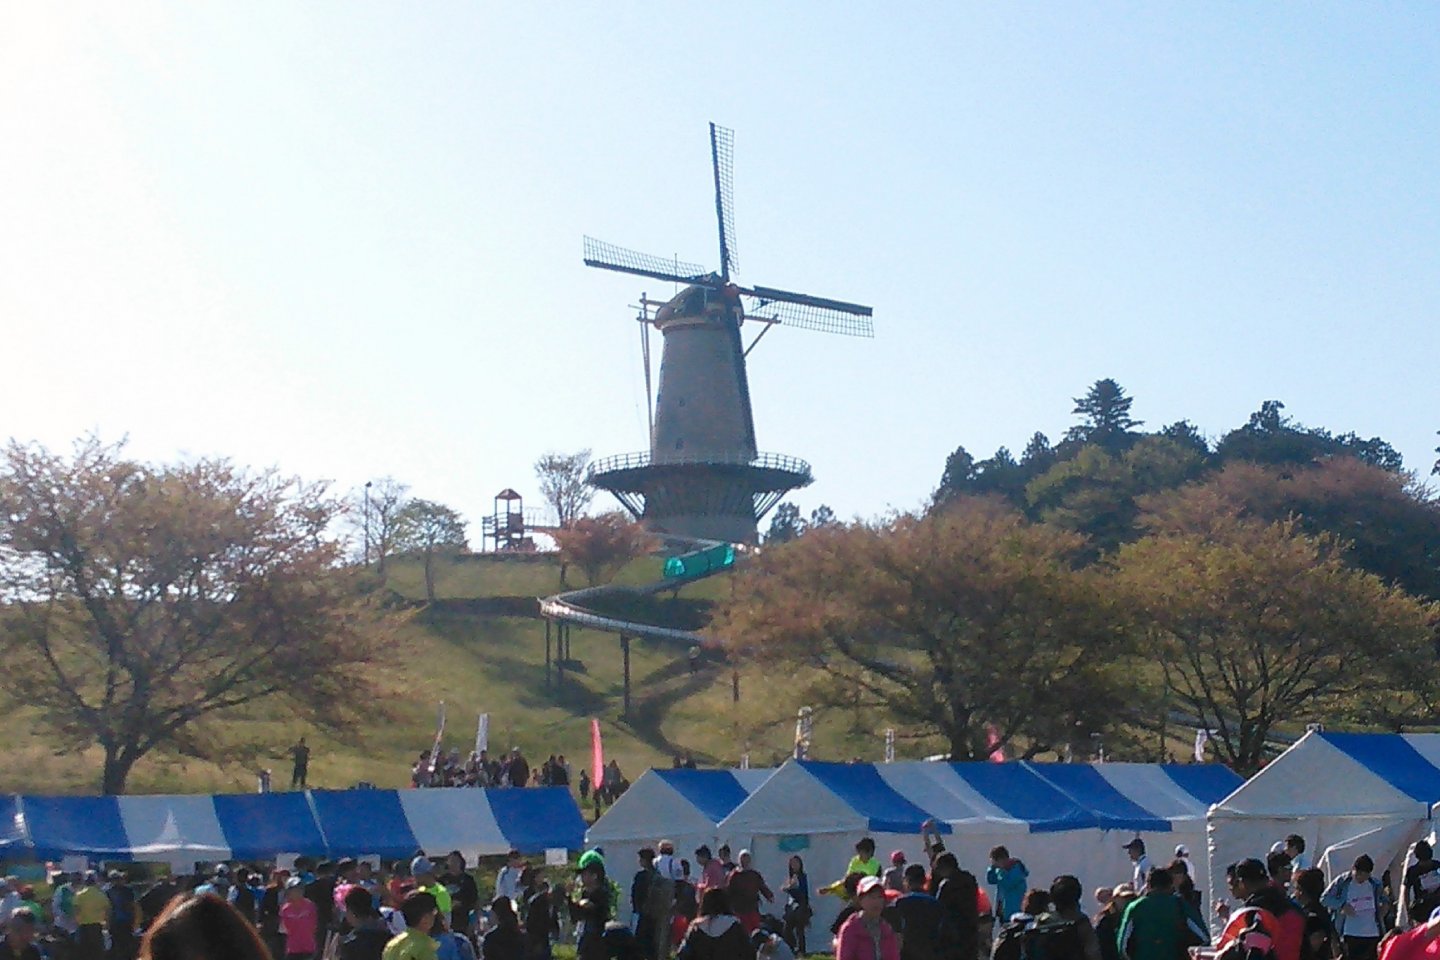 The windmill overlooking the registration area for the runners.  You can see the windmill from across the lake as well.